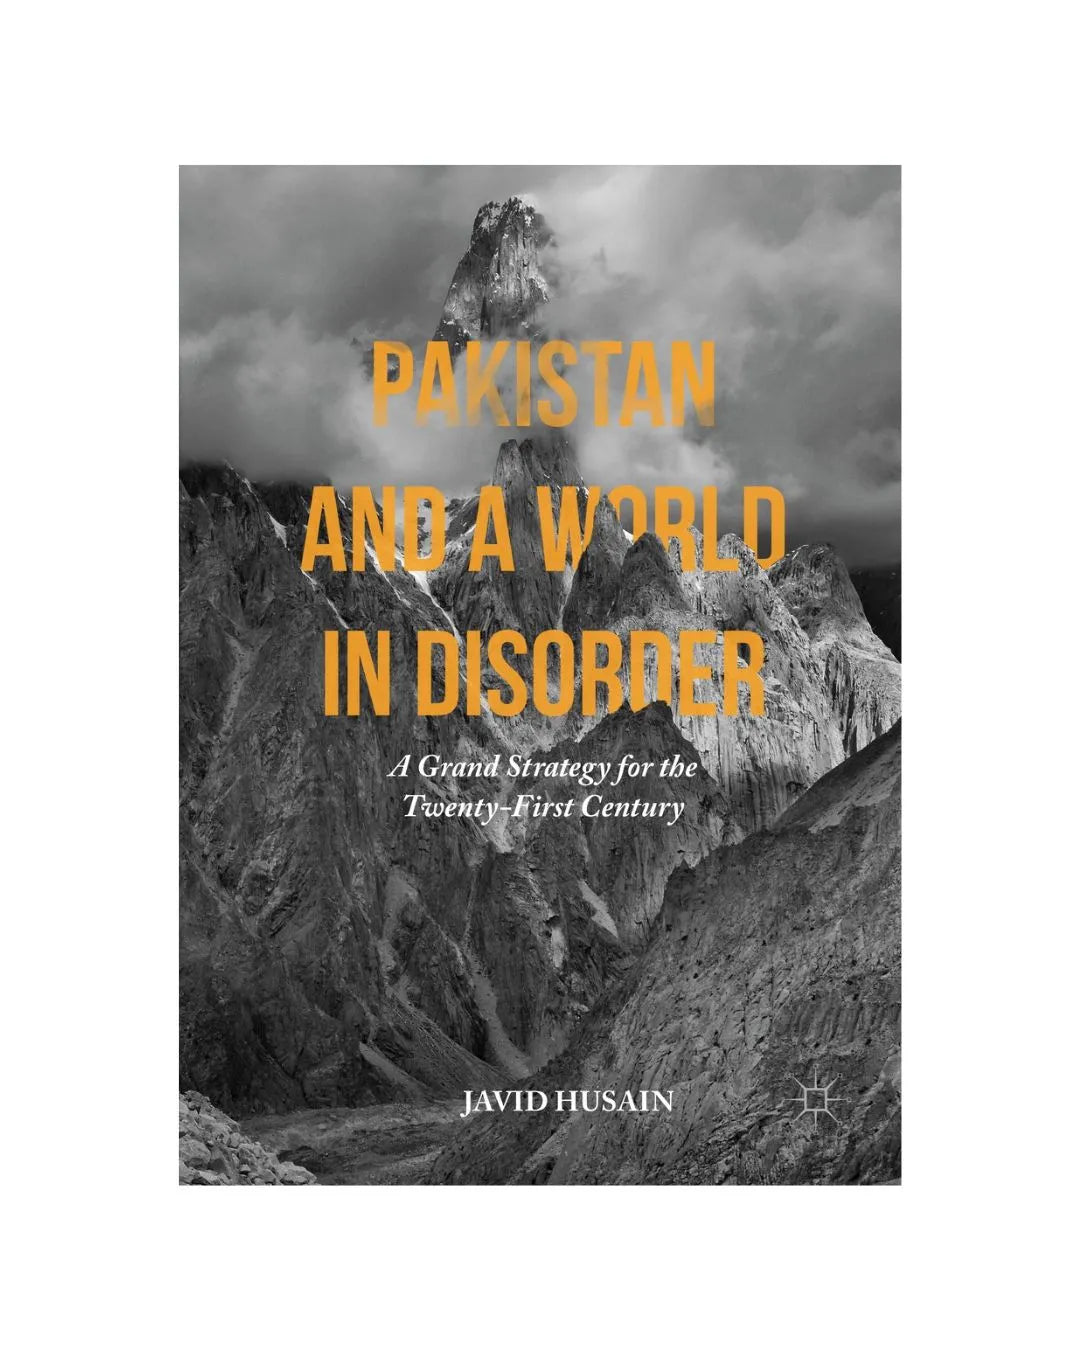 buy pakistan and a world in disorder online - Online Books Outlet